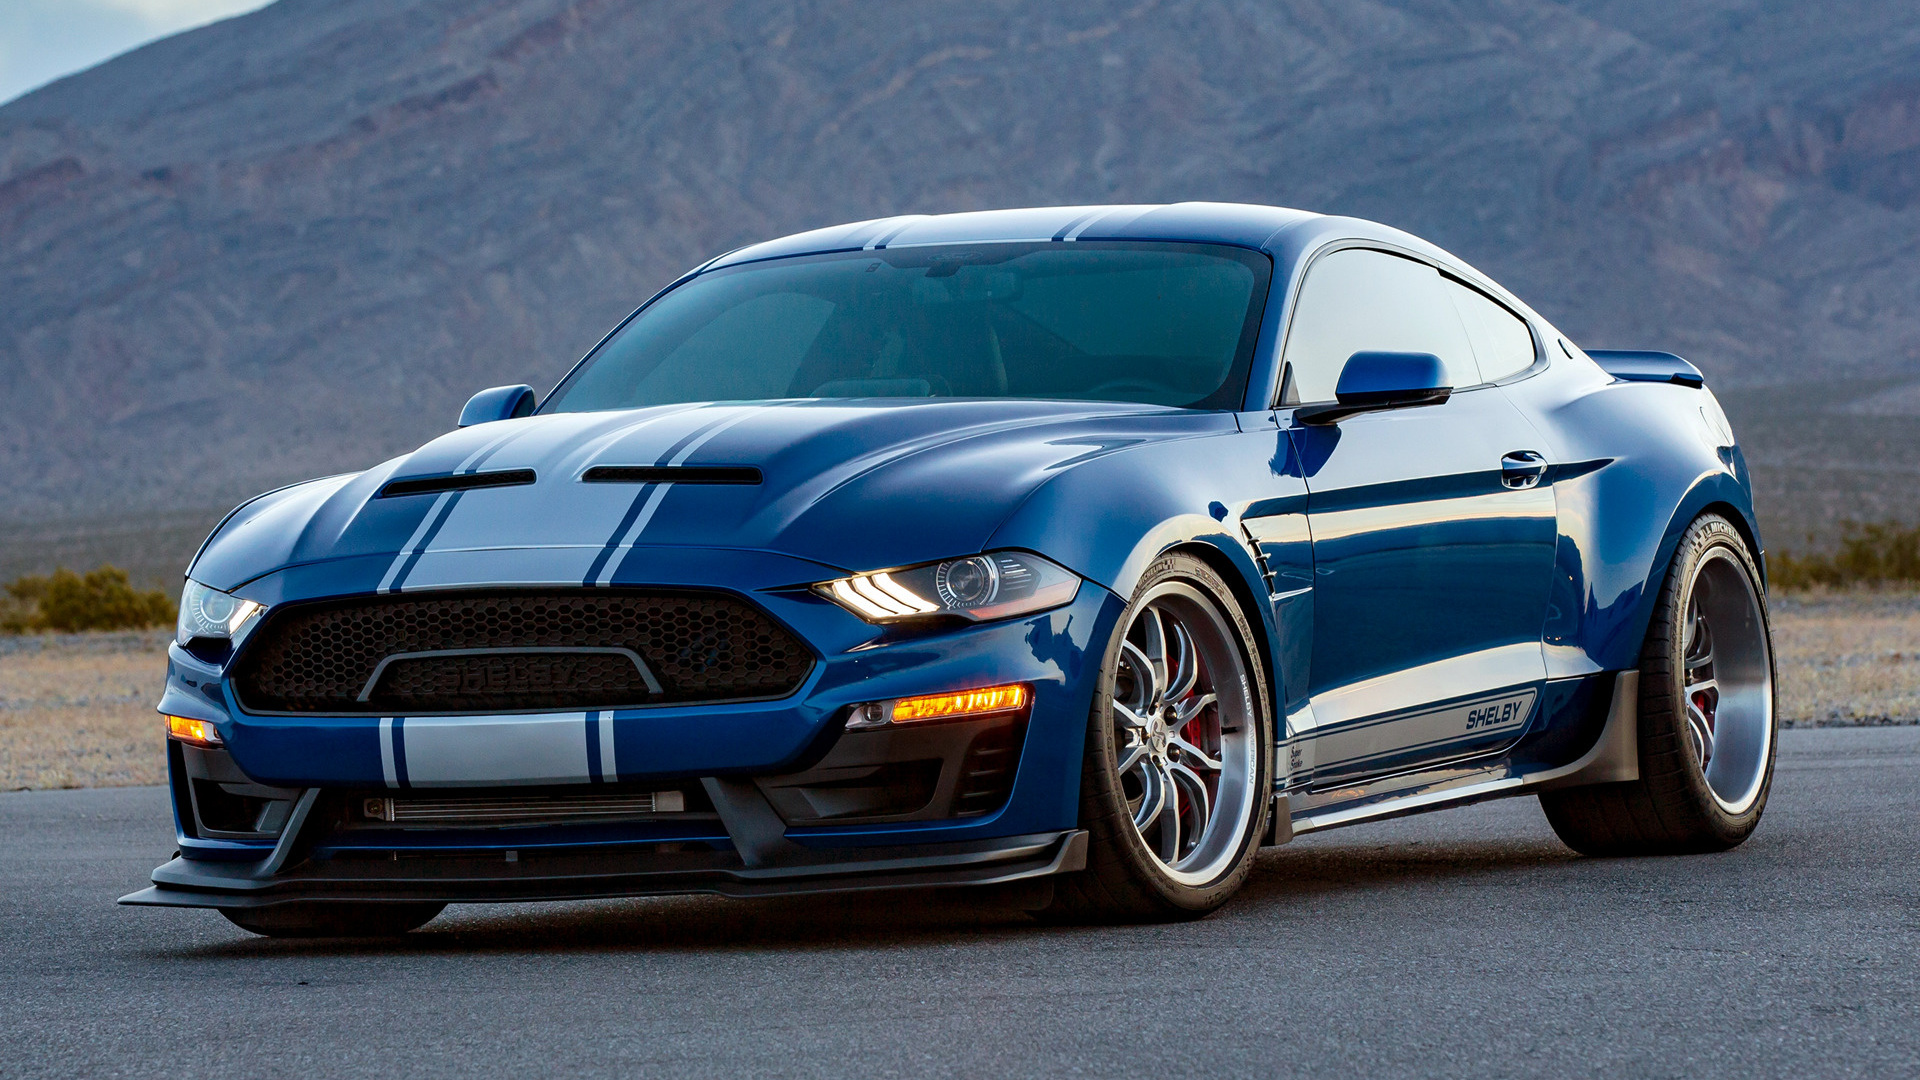 Mustang Of The Day: 2018 Shelby Super Snake 